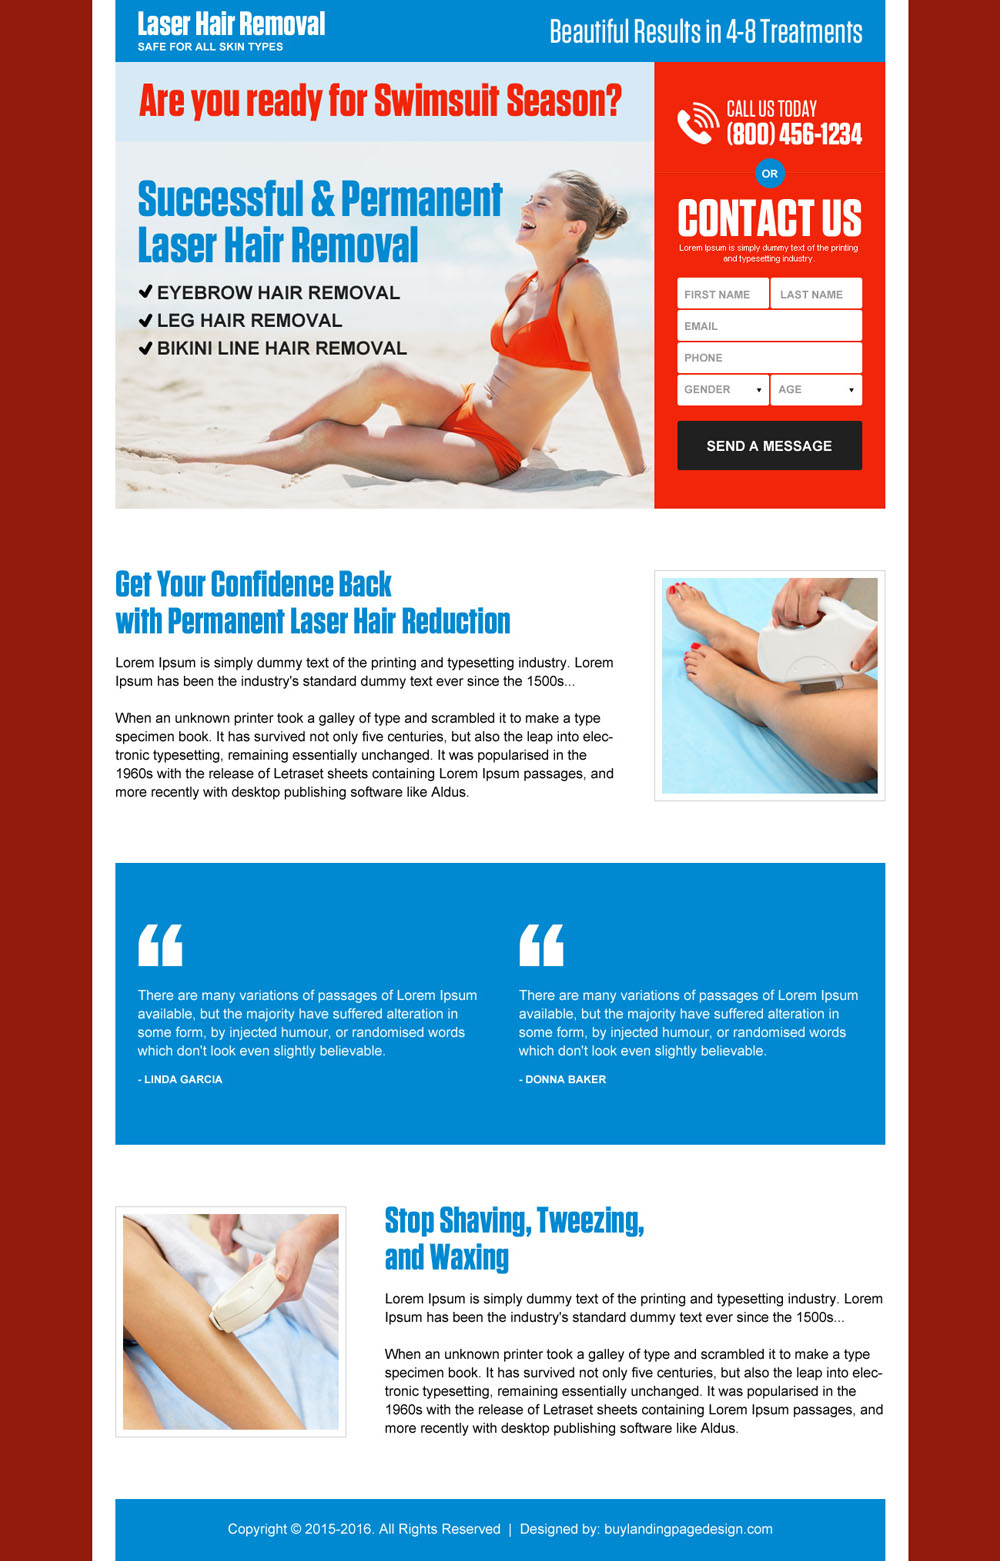 permanent-laser-hair-removal-lead-generation-converting-landing-page-design-004